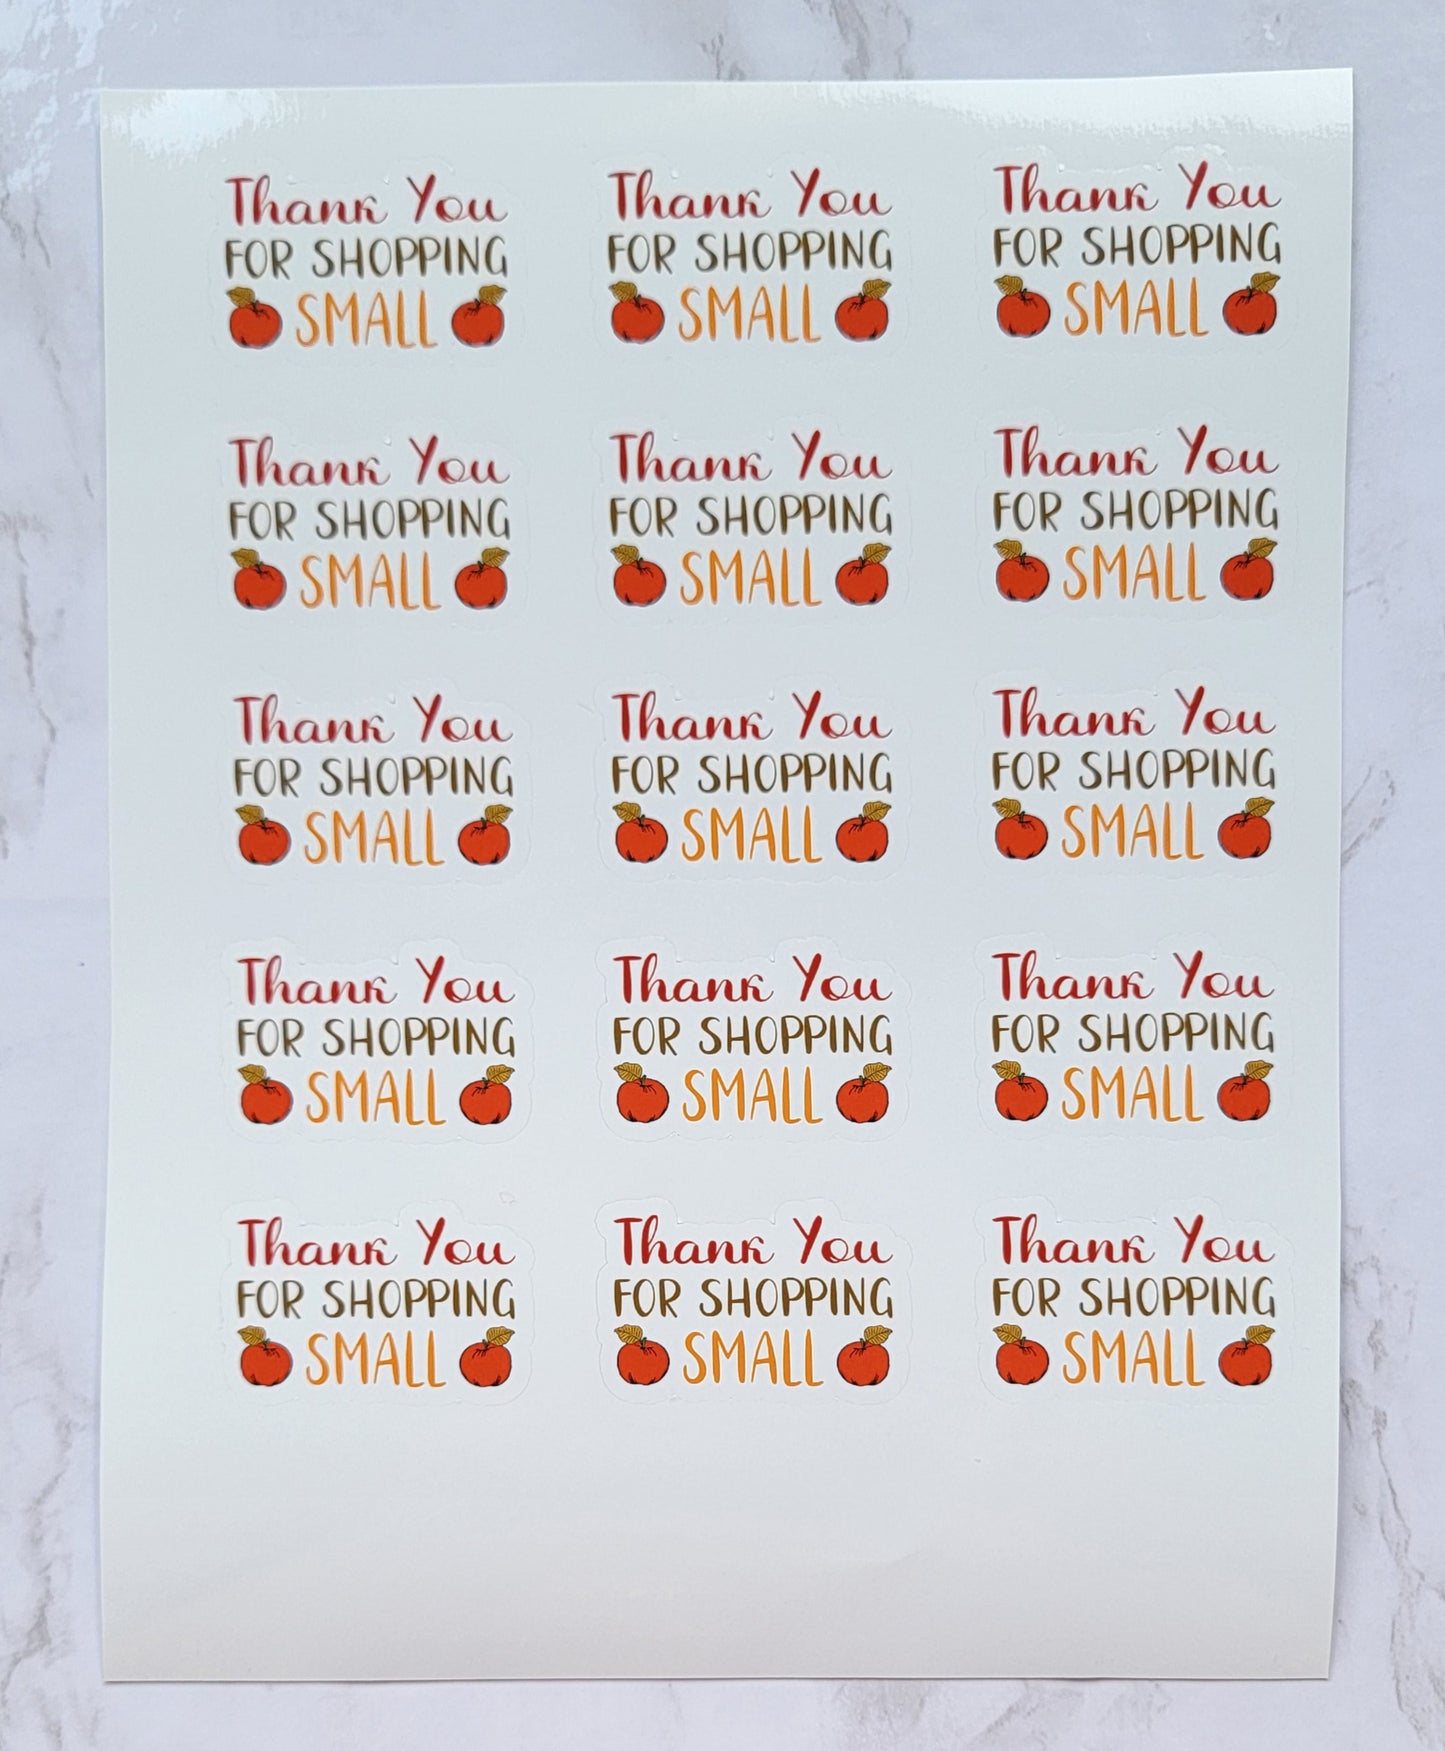 Small Business Appreciation - "Thank You For Shopping Small" - Red, Brown & Orange w/ White Background -  Waterproof Sticker Sheet